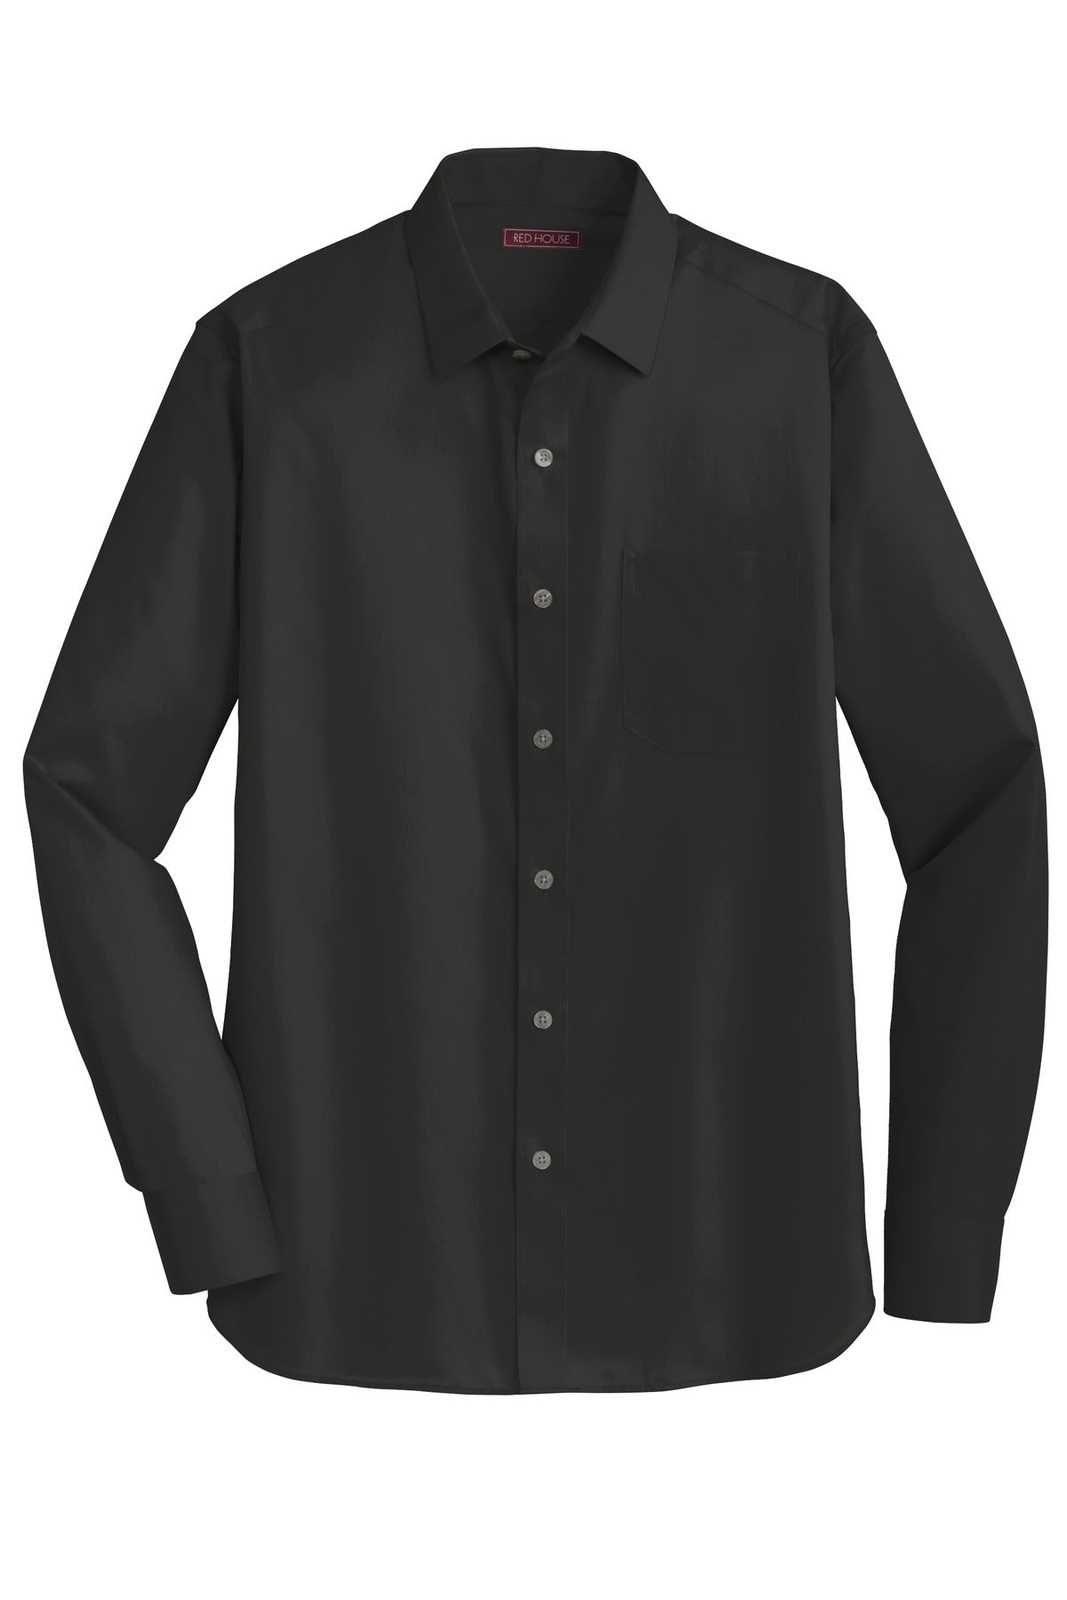 Red House RH80 Slim Fit Non-Iron Twill Shirt - Black - HIT a Double - 5